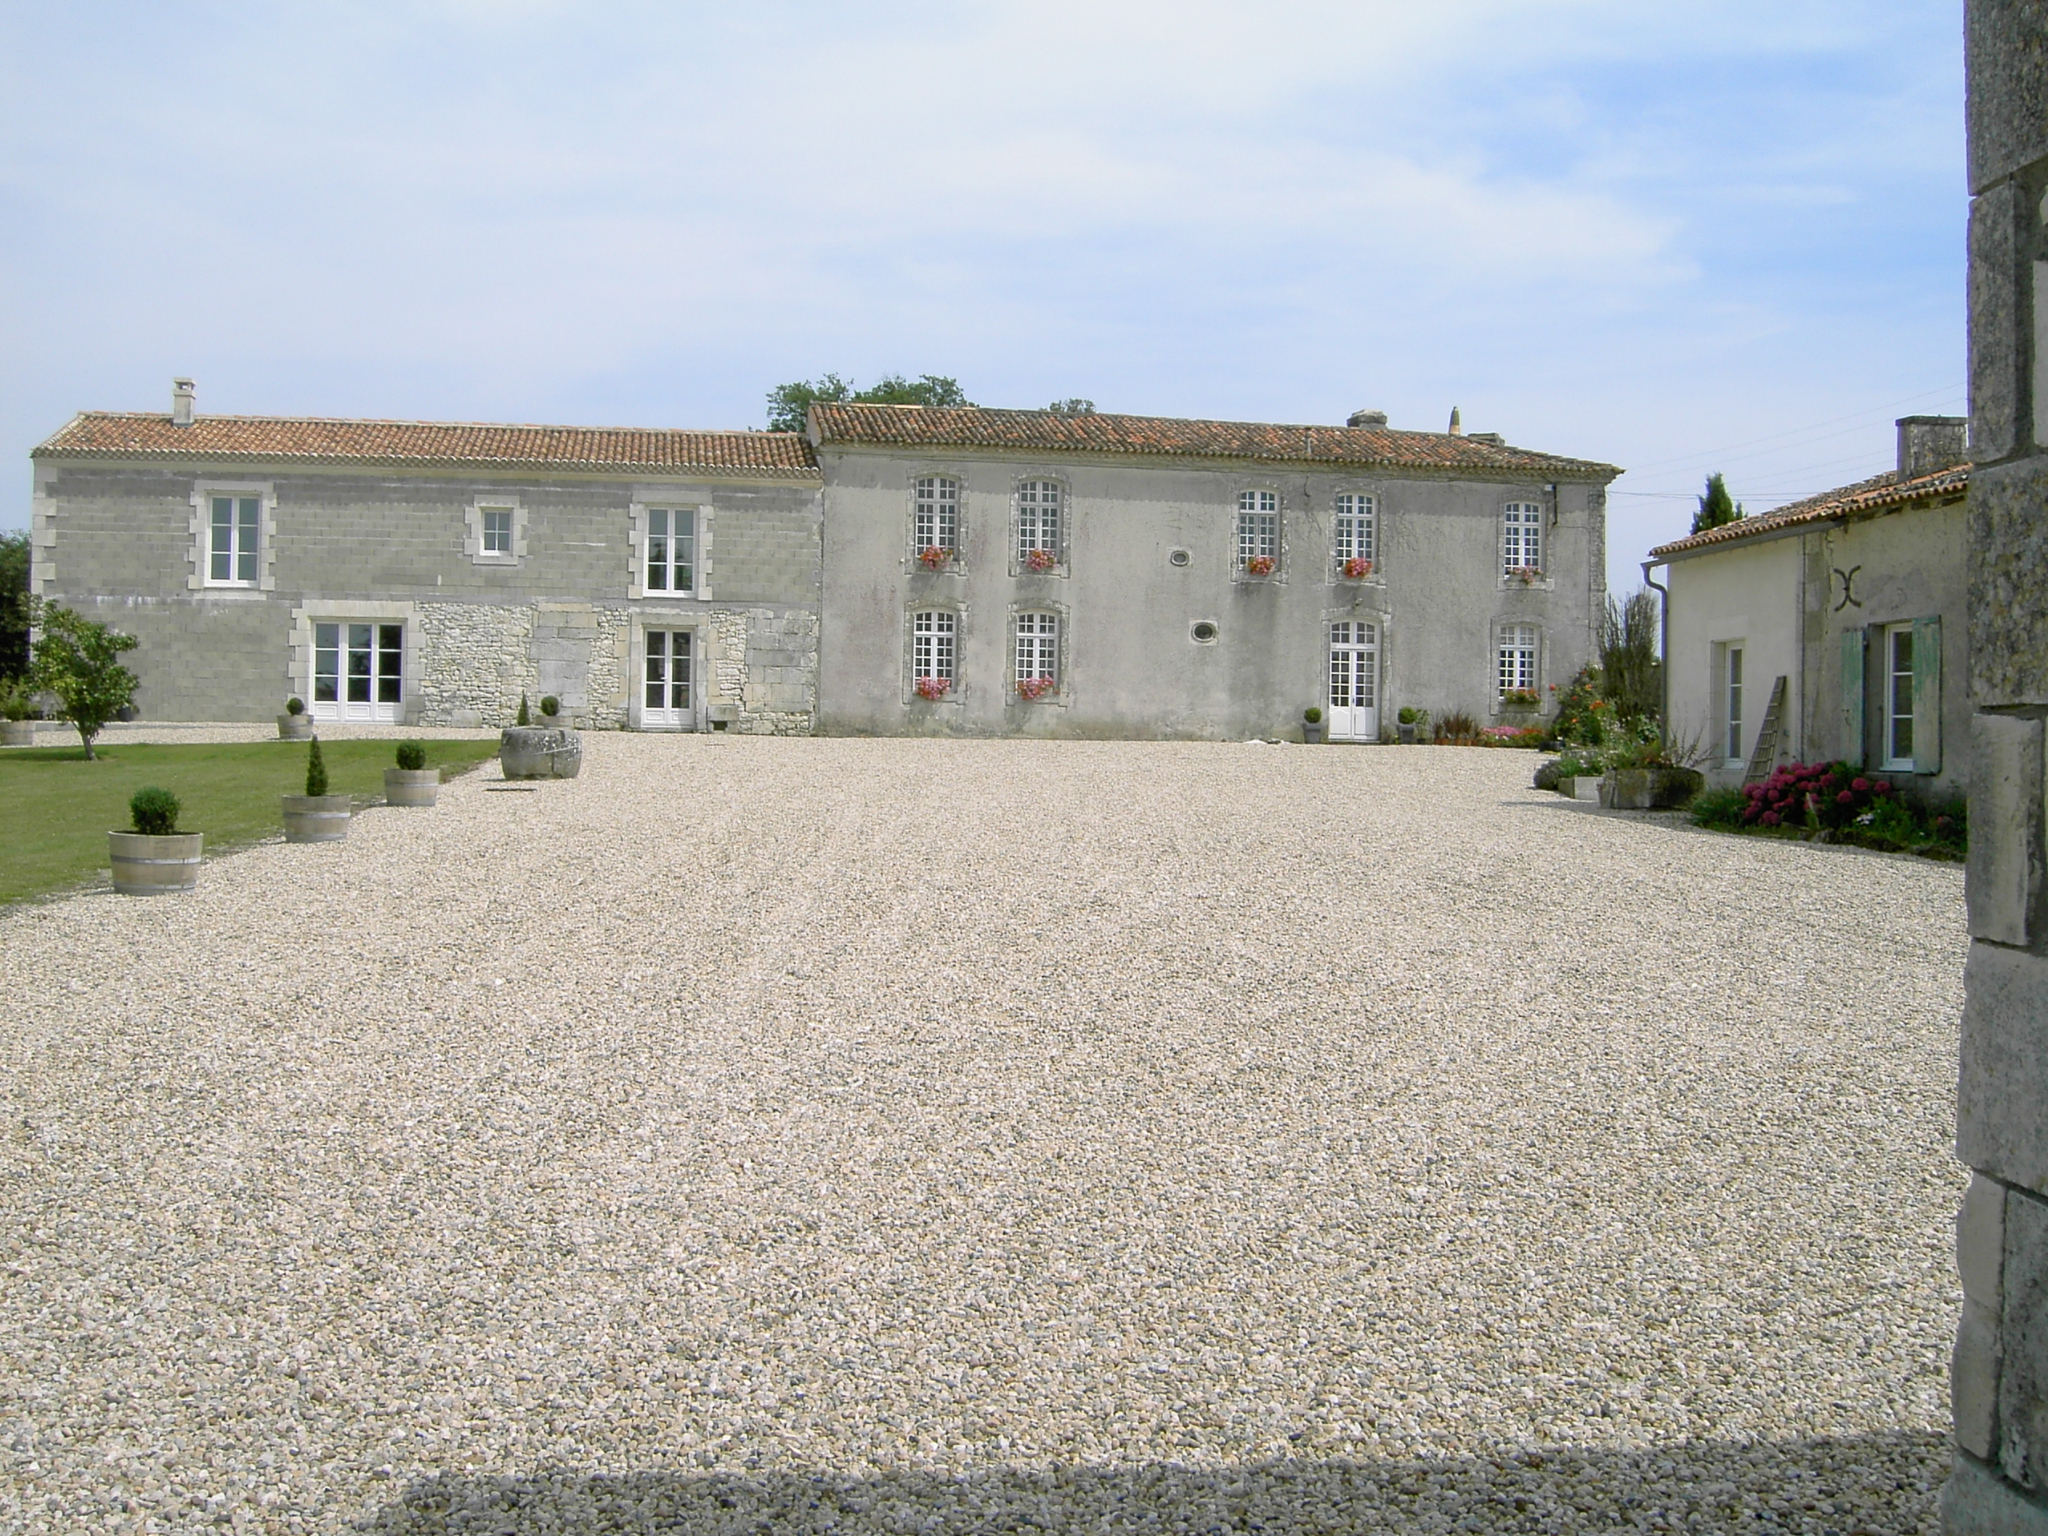 View of courtyard and main house at Limorlin. The gîte is to the right